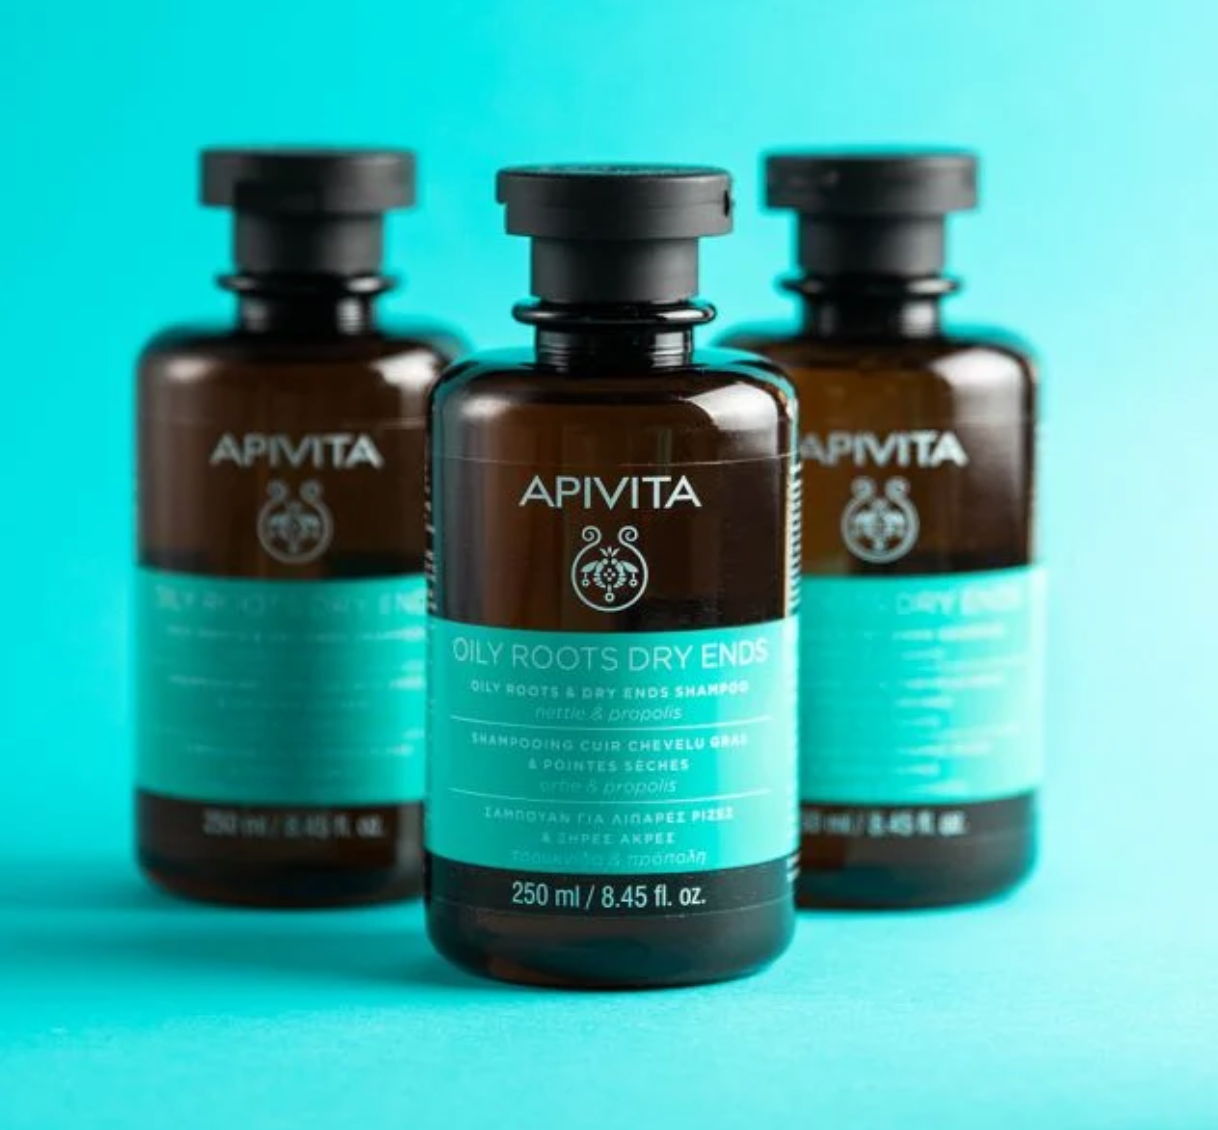 Apivita Oily Roots & Dry Ends Shampoo is a proprietary blend of Greek organic natural ingredients.